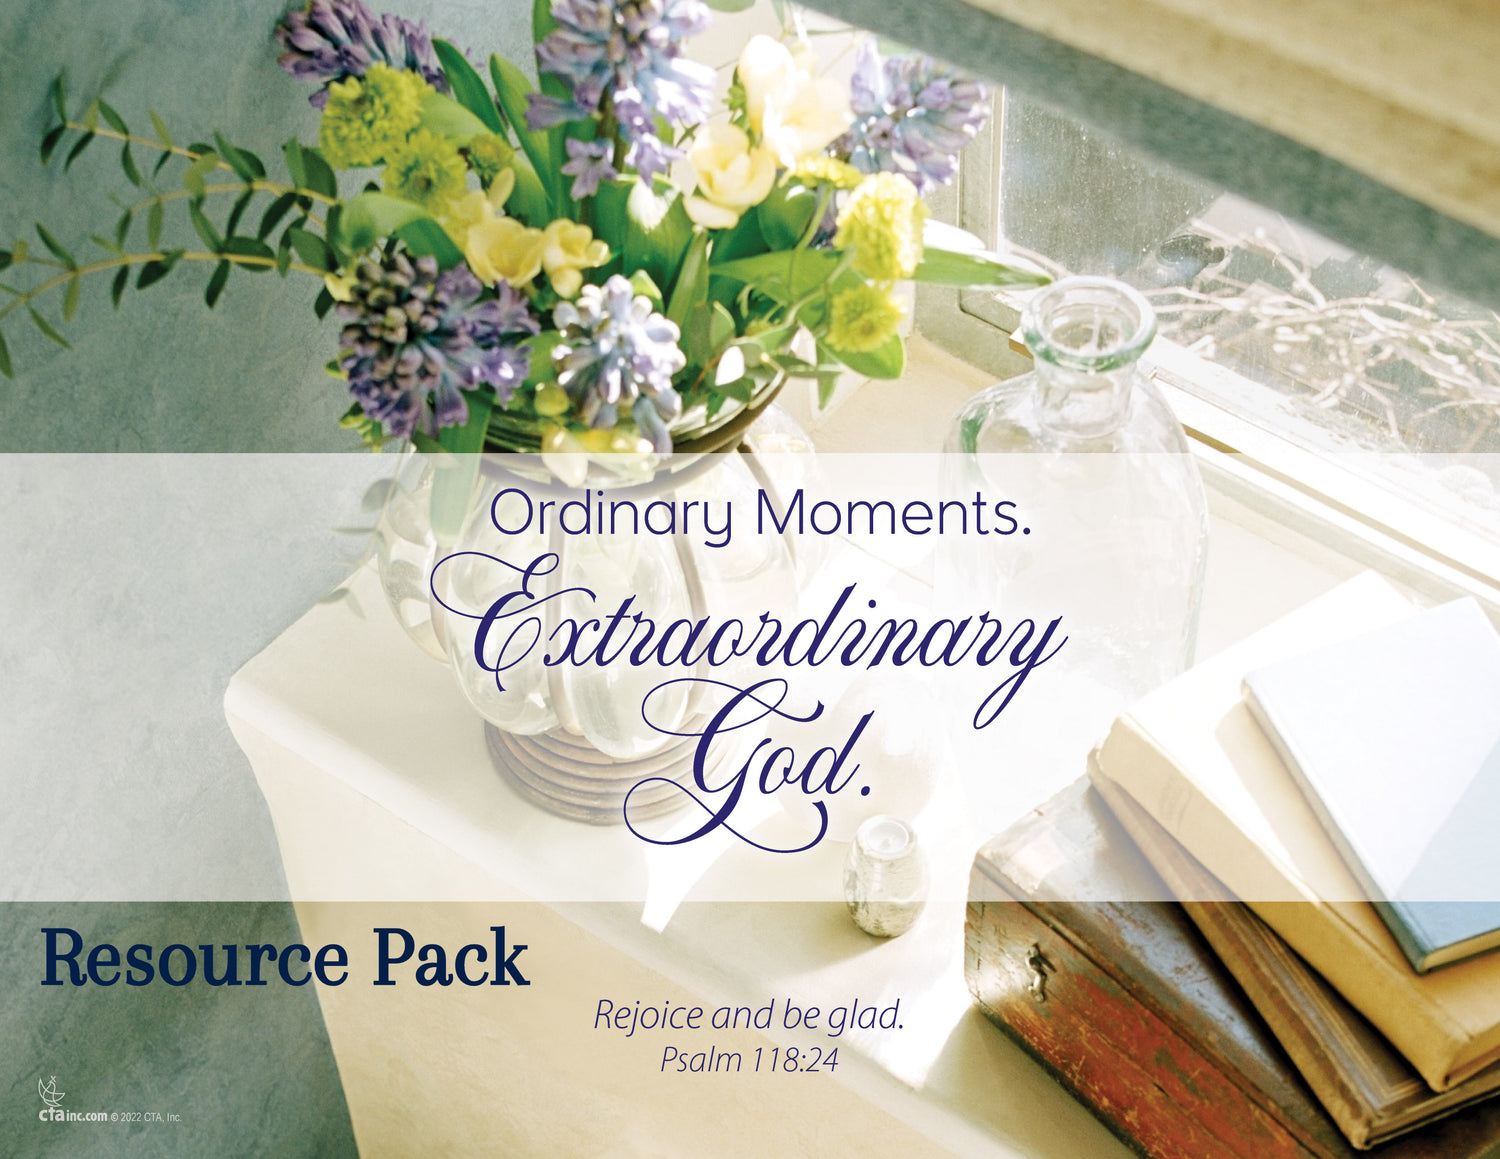 Resource Pack - Ordinary Moments. Extraordinary God.